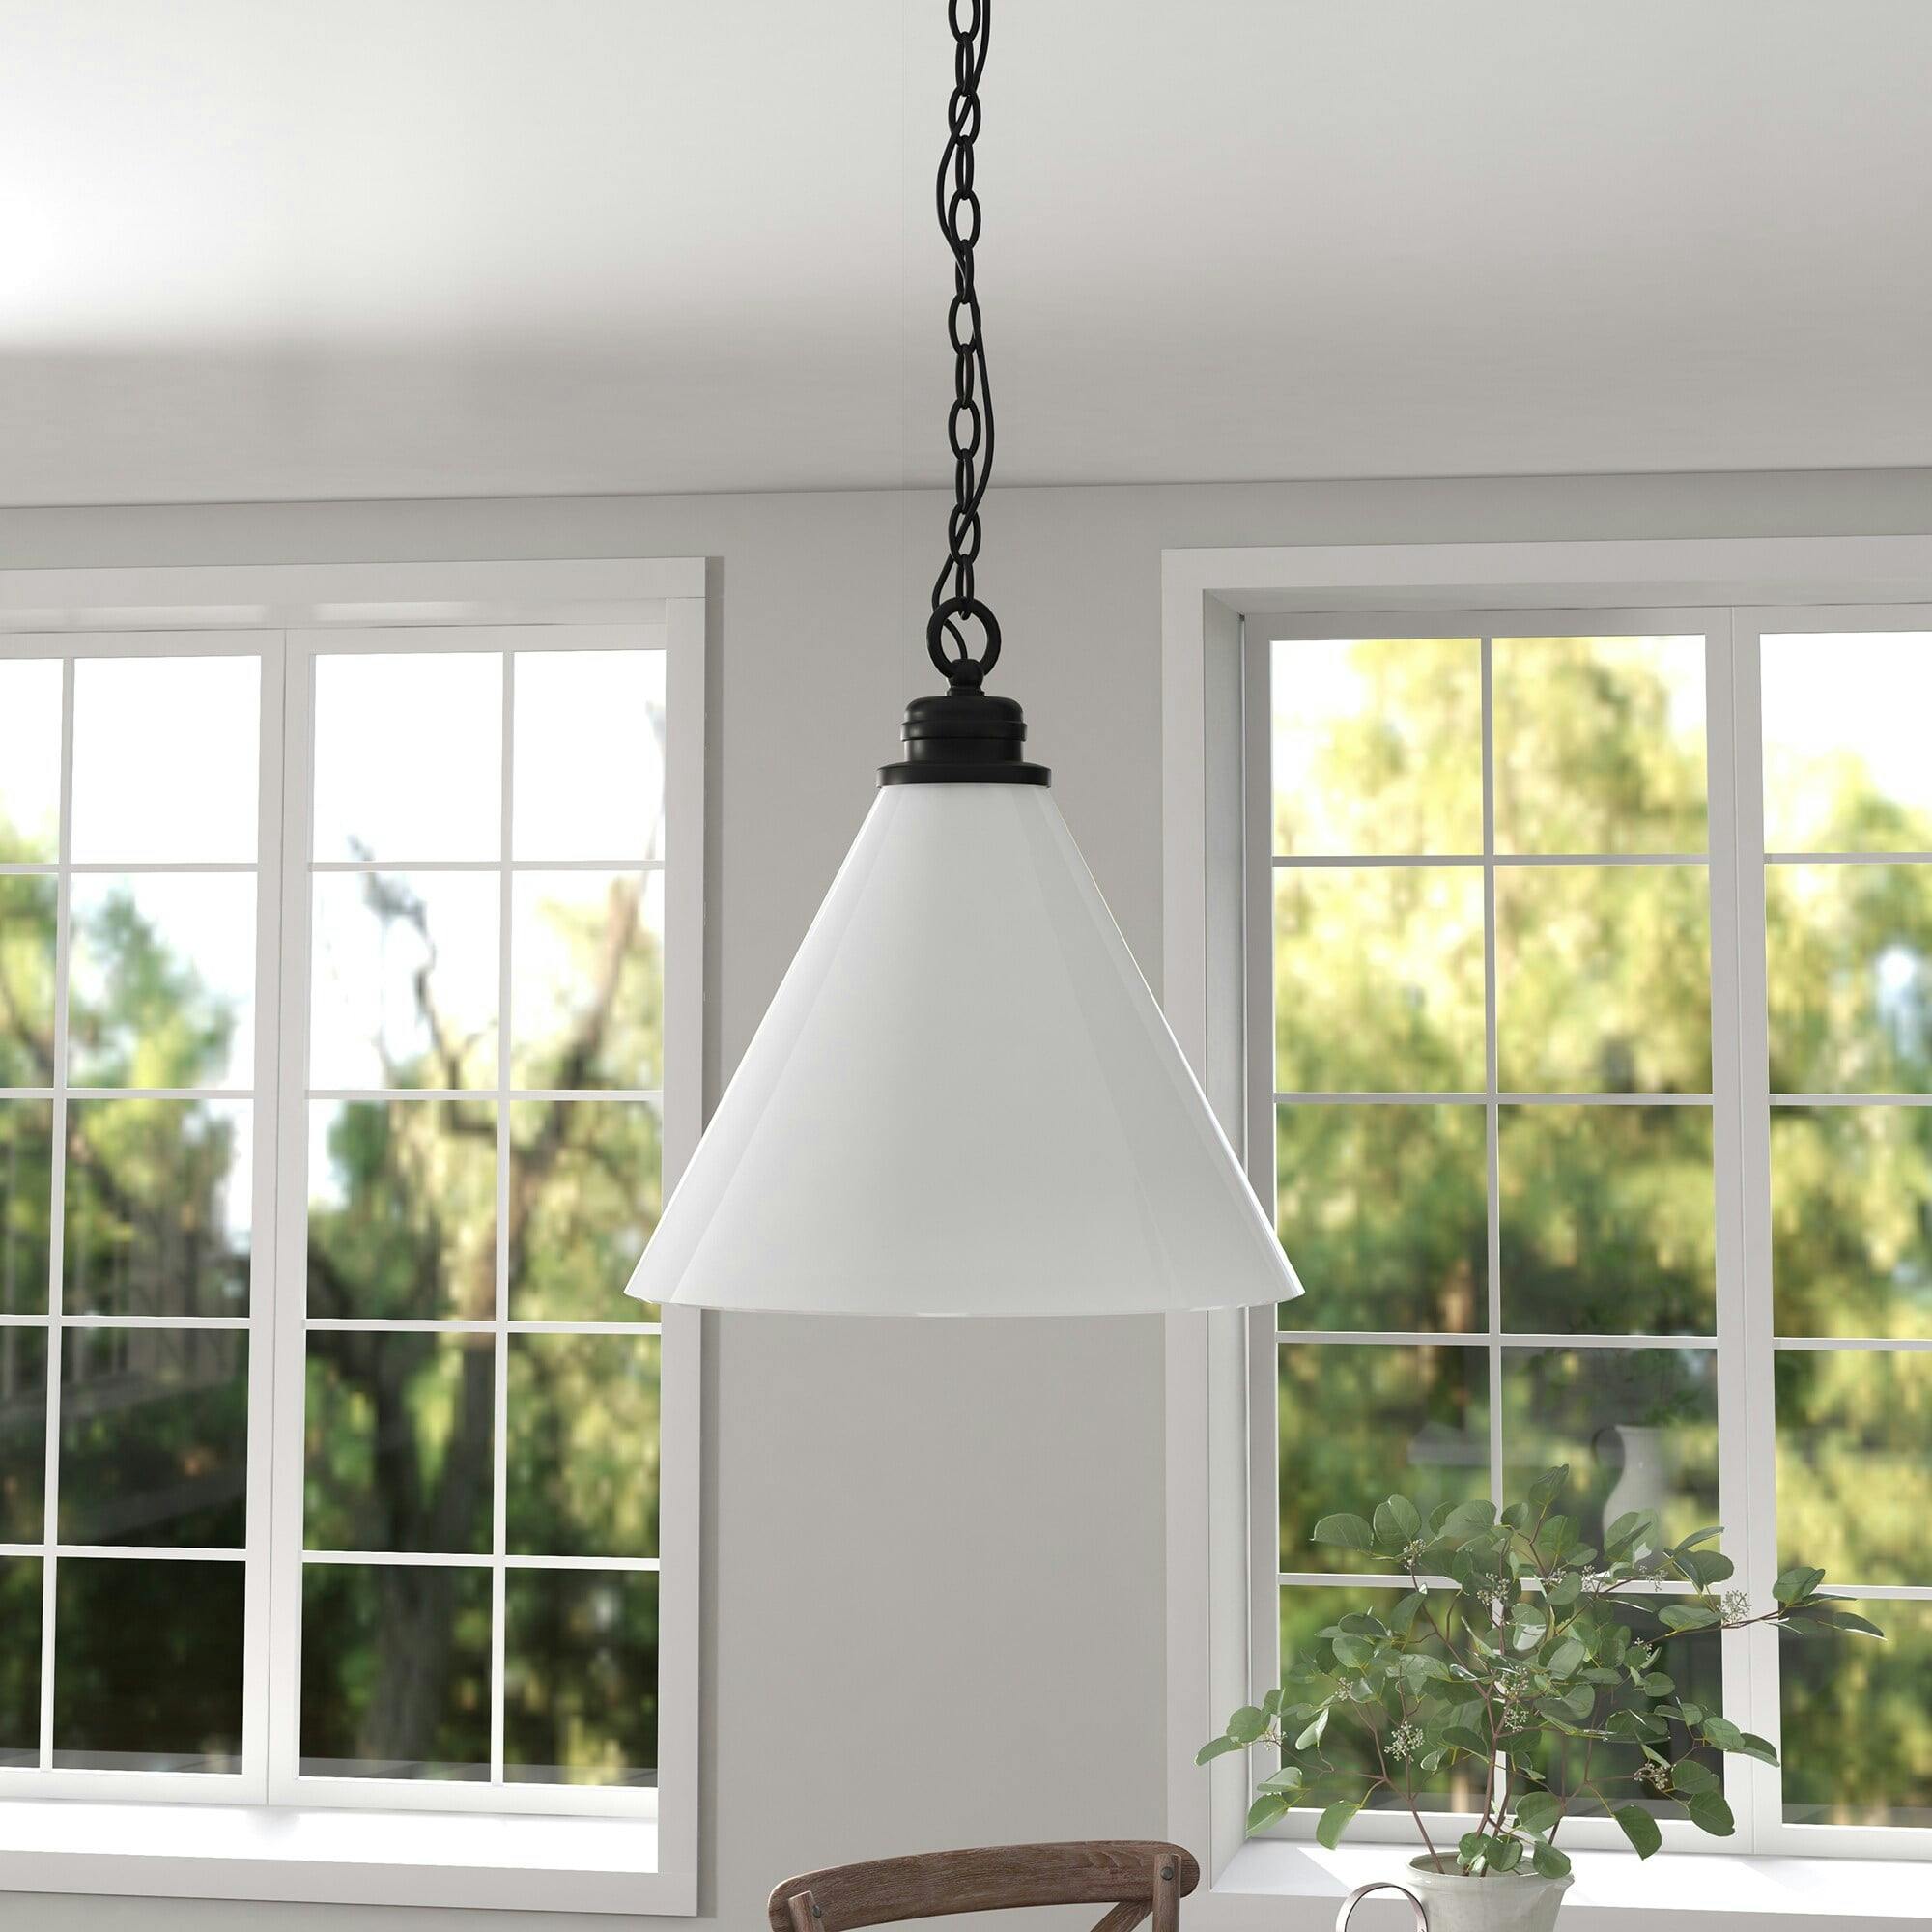 Canto Contemporary 15" Bowl Pendant in Blackened Bronze with White Glass Shade